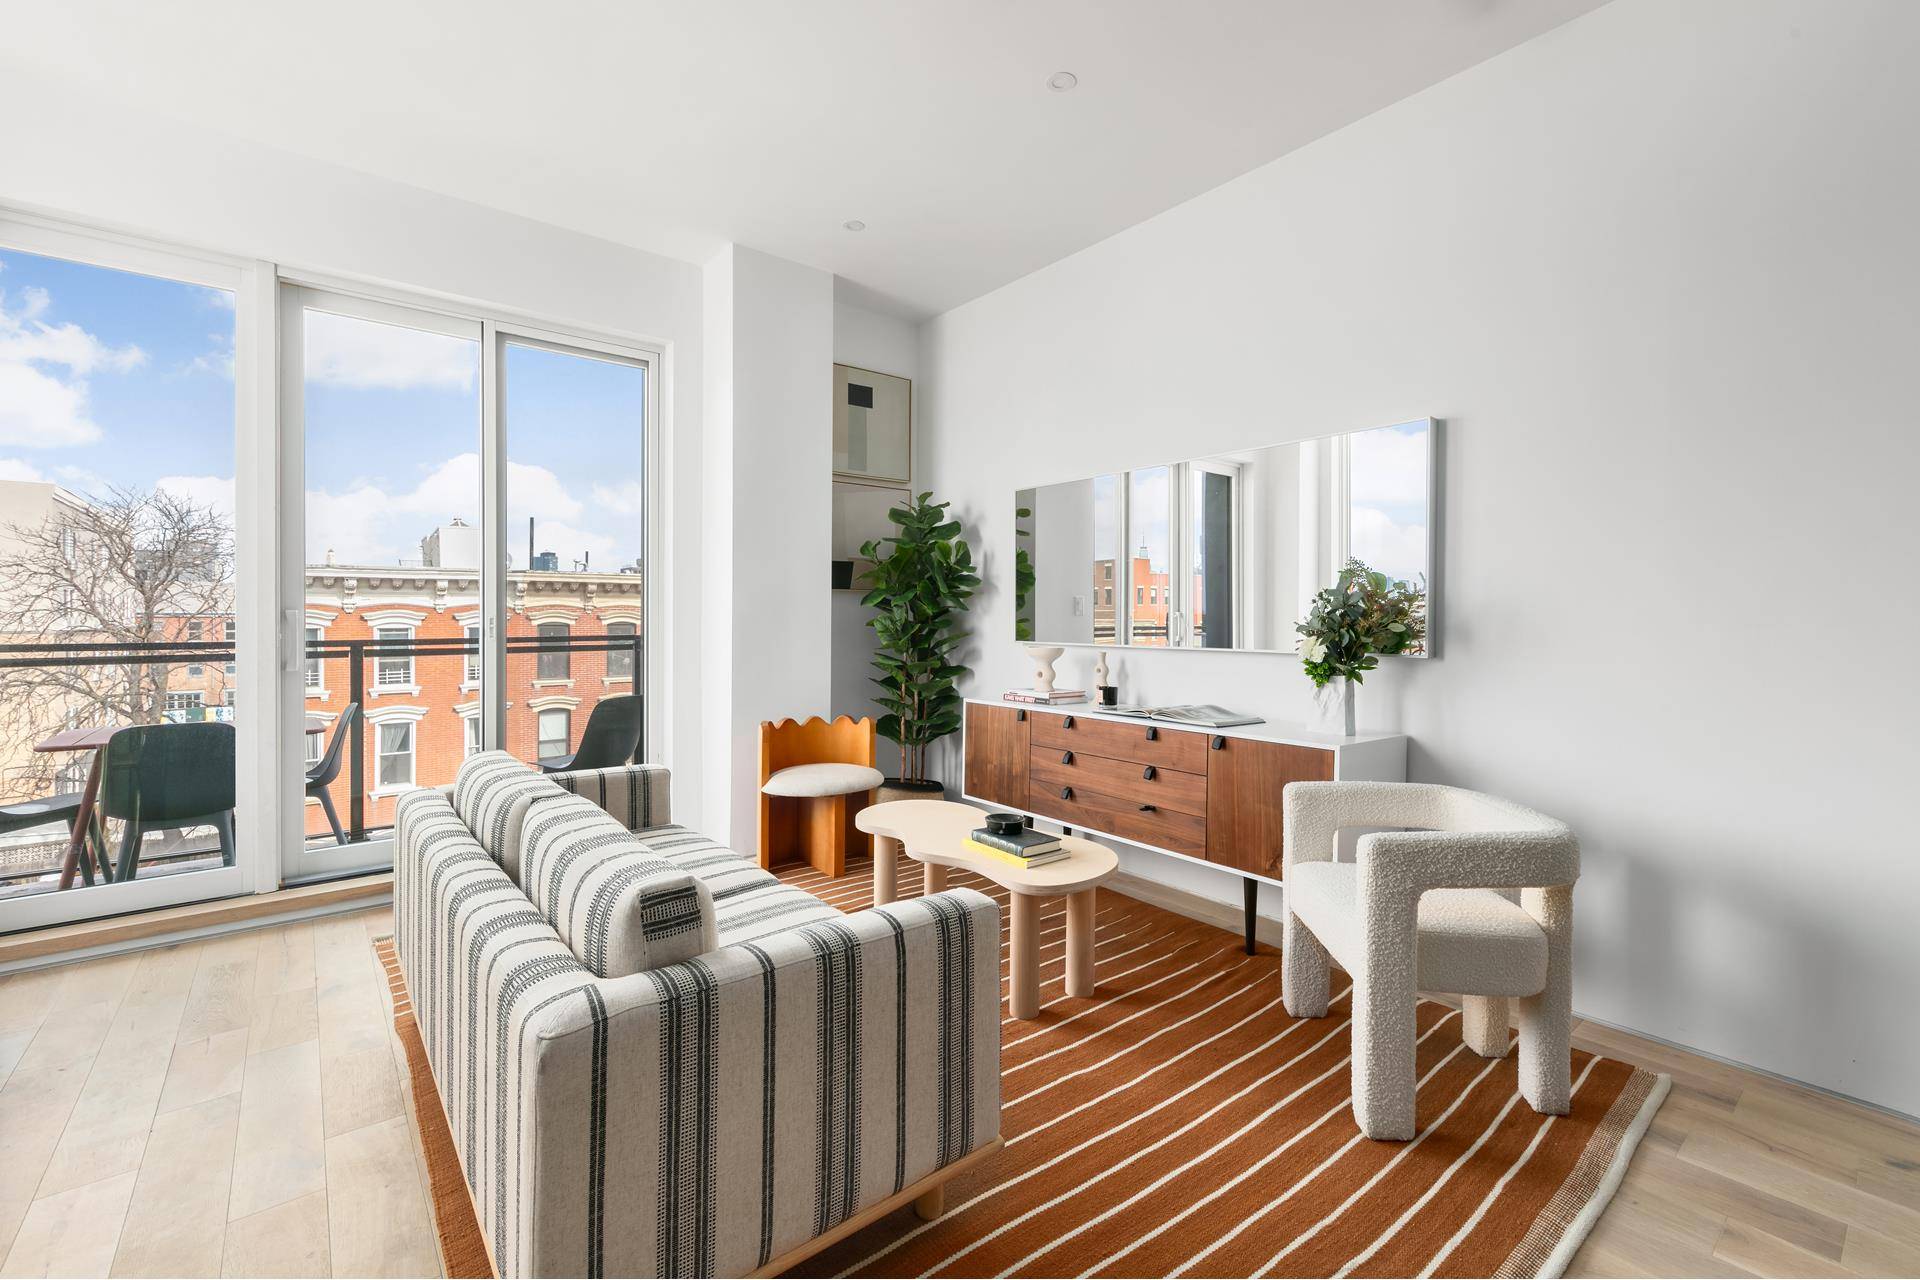 Introducing 3B at 136 14th Street Simply the best priced 2 bed 2 bath home with a private balcony at the Genesis, a boutique new development at the intersection of ...